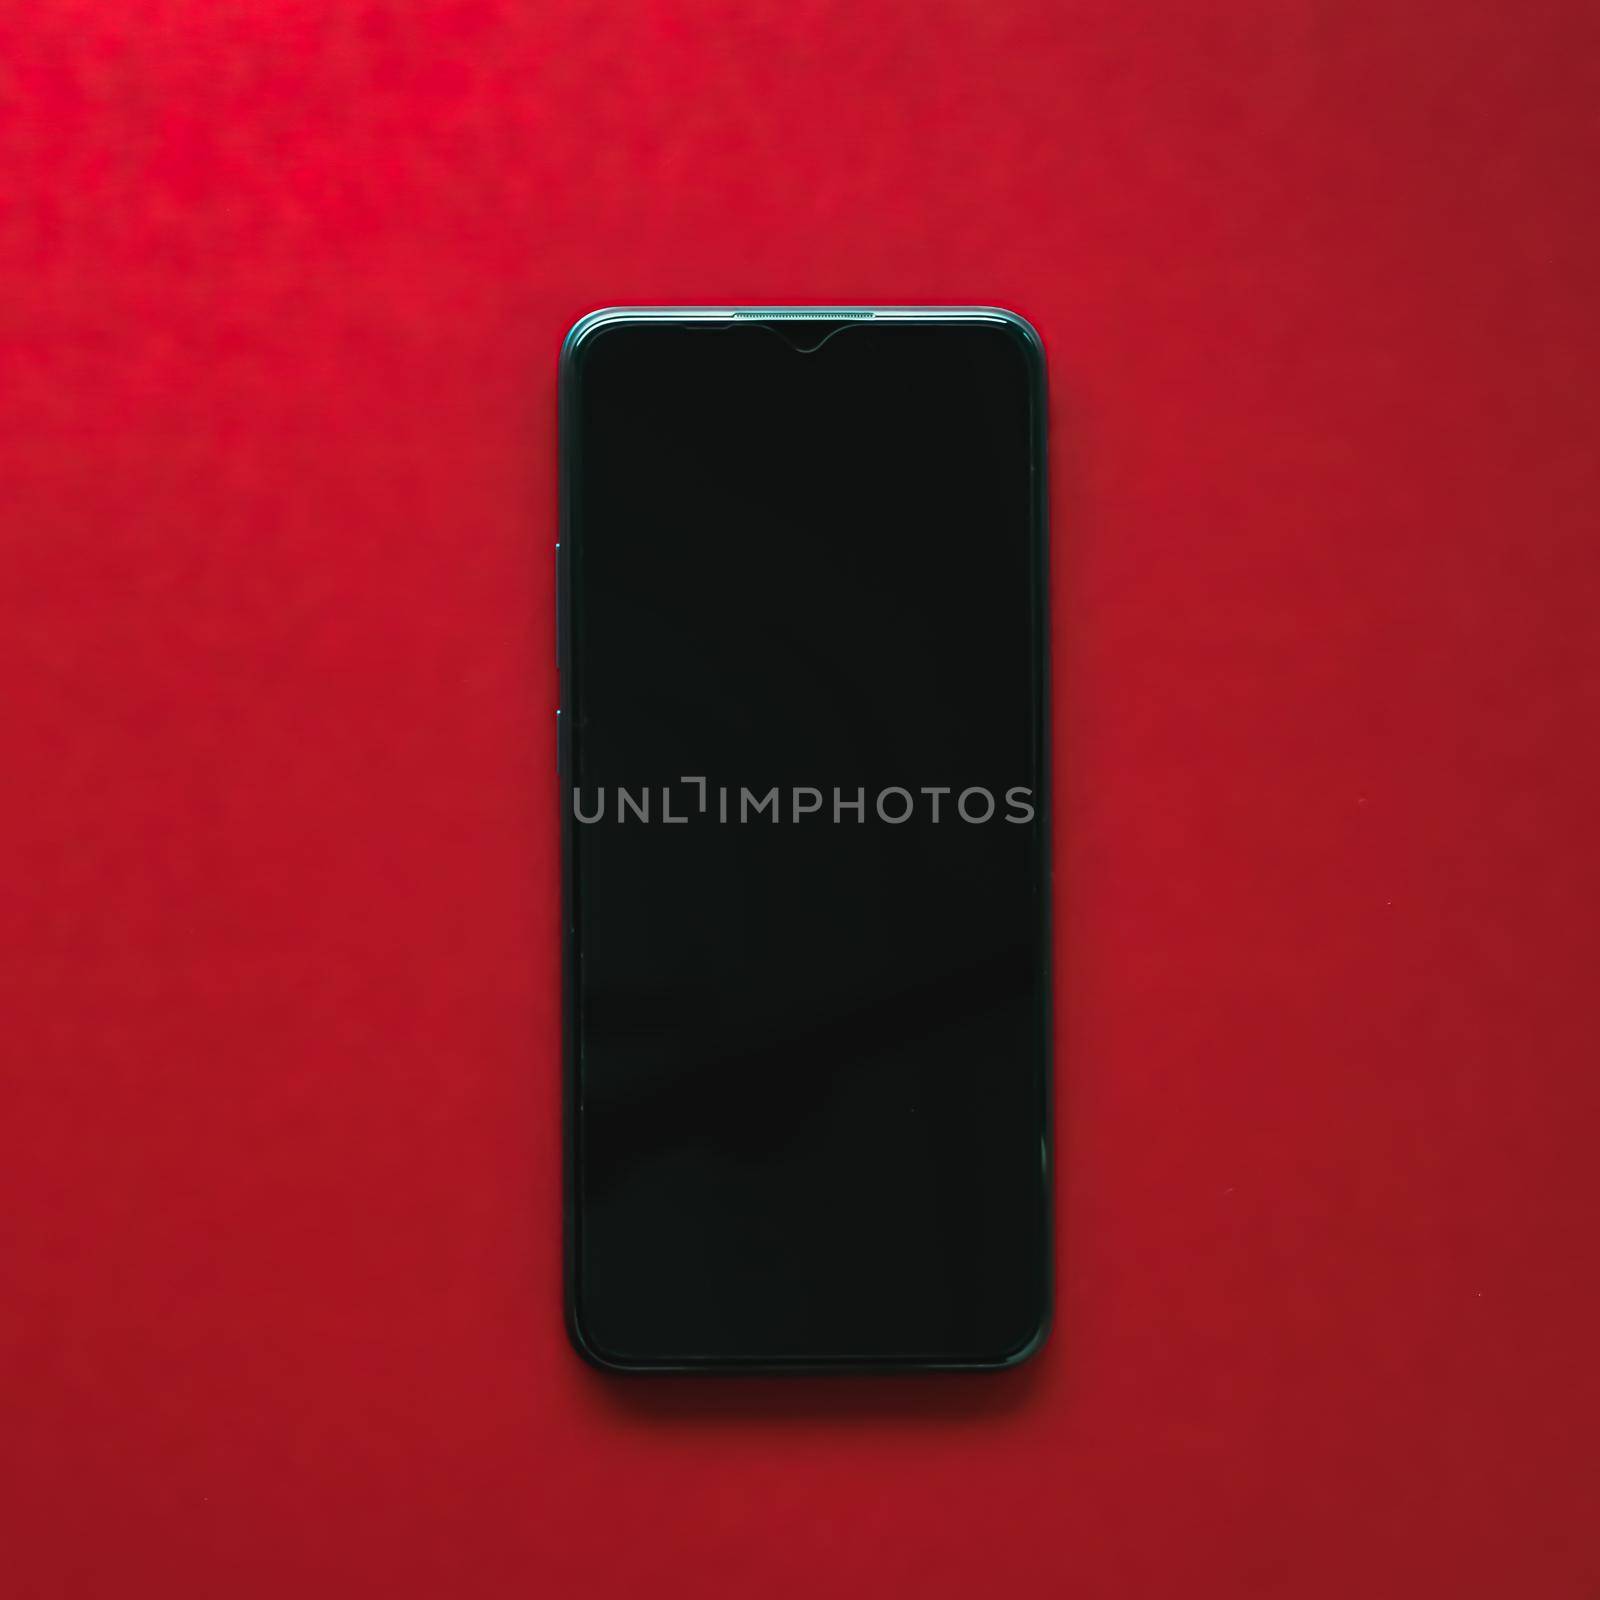 Mobile app design or smartphone screen flatlay concept. Mobile phone as new model presentation mockup or application template, brand marketing design on red background as flat lay by Anneleven